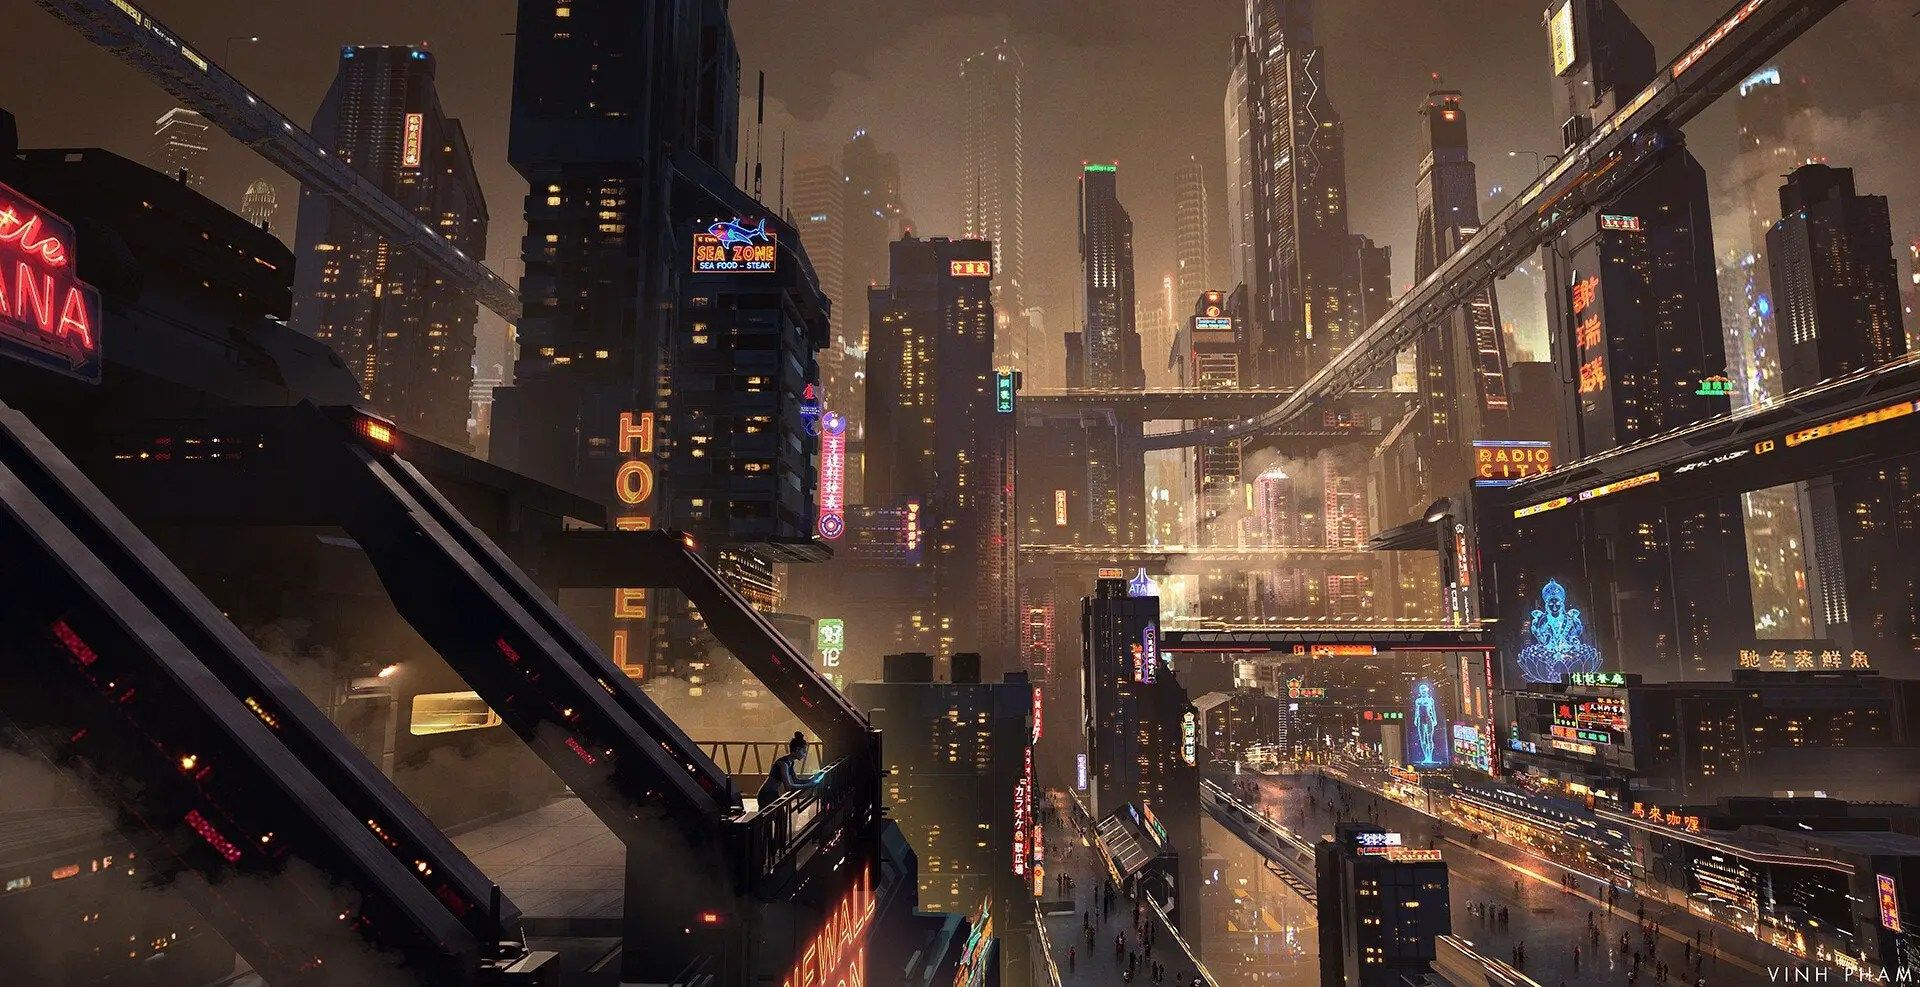 Cyberpunk city at night with neon lights and skyscrapers - Cyberpunk